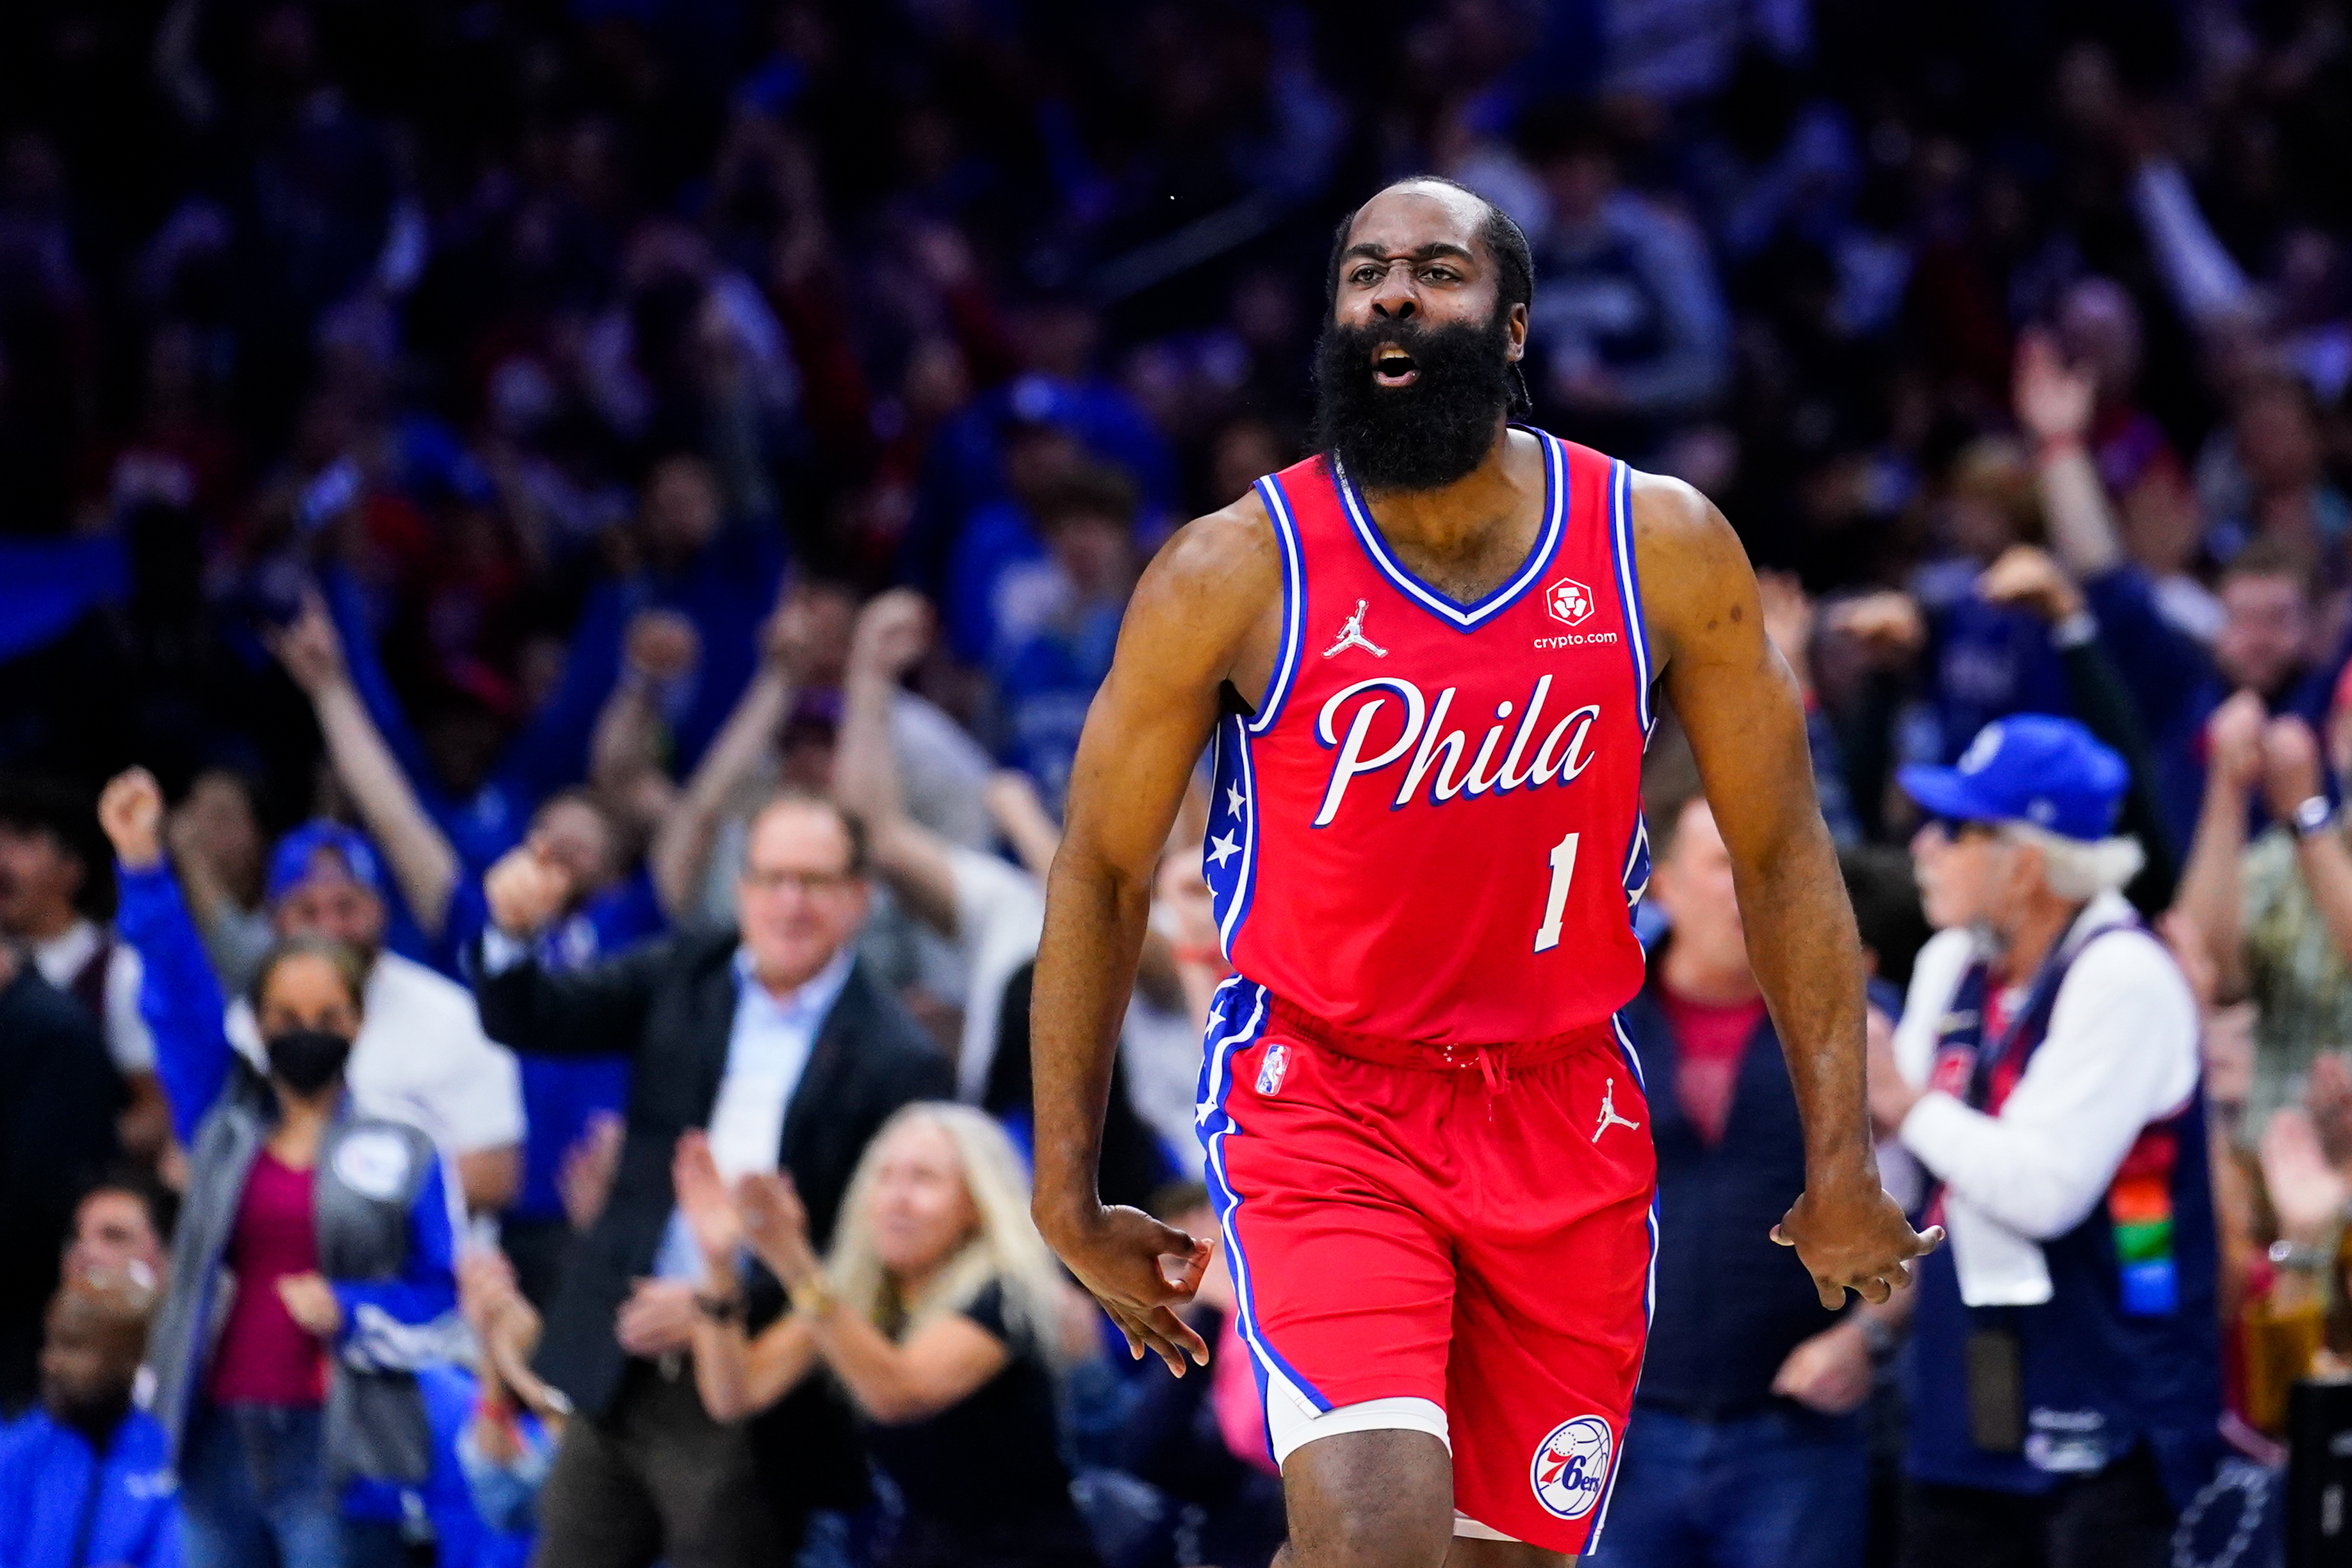 Is the 76ers' James Harden about to go play in China? - AS USA